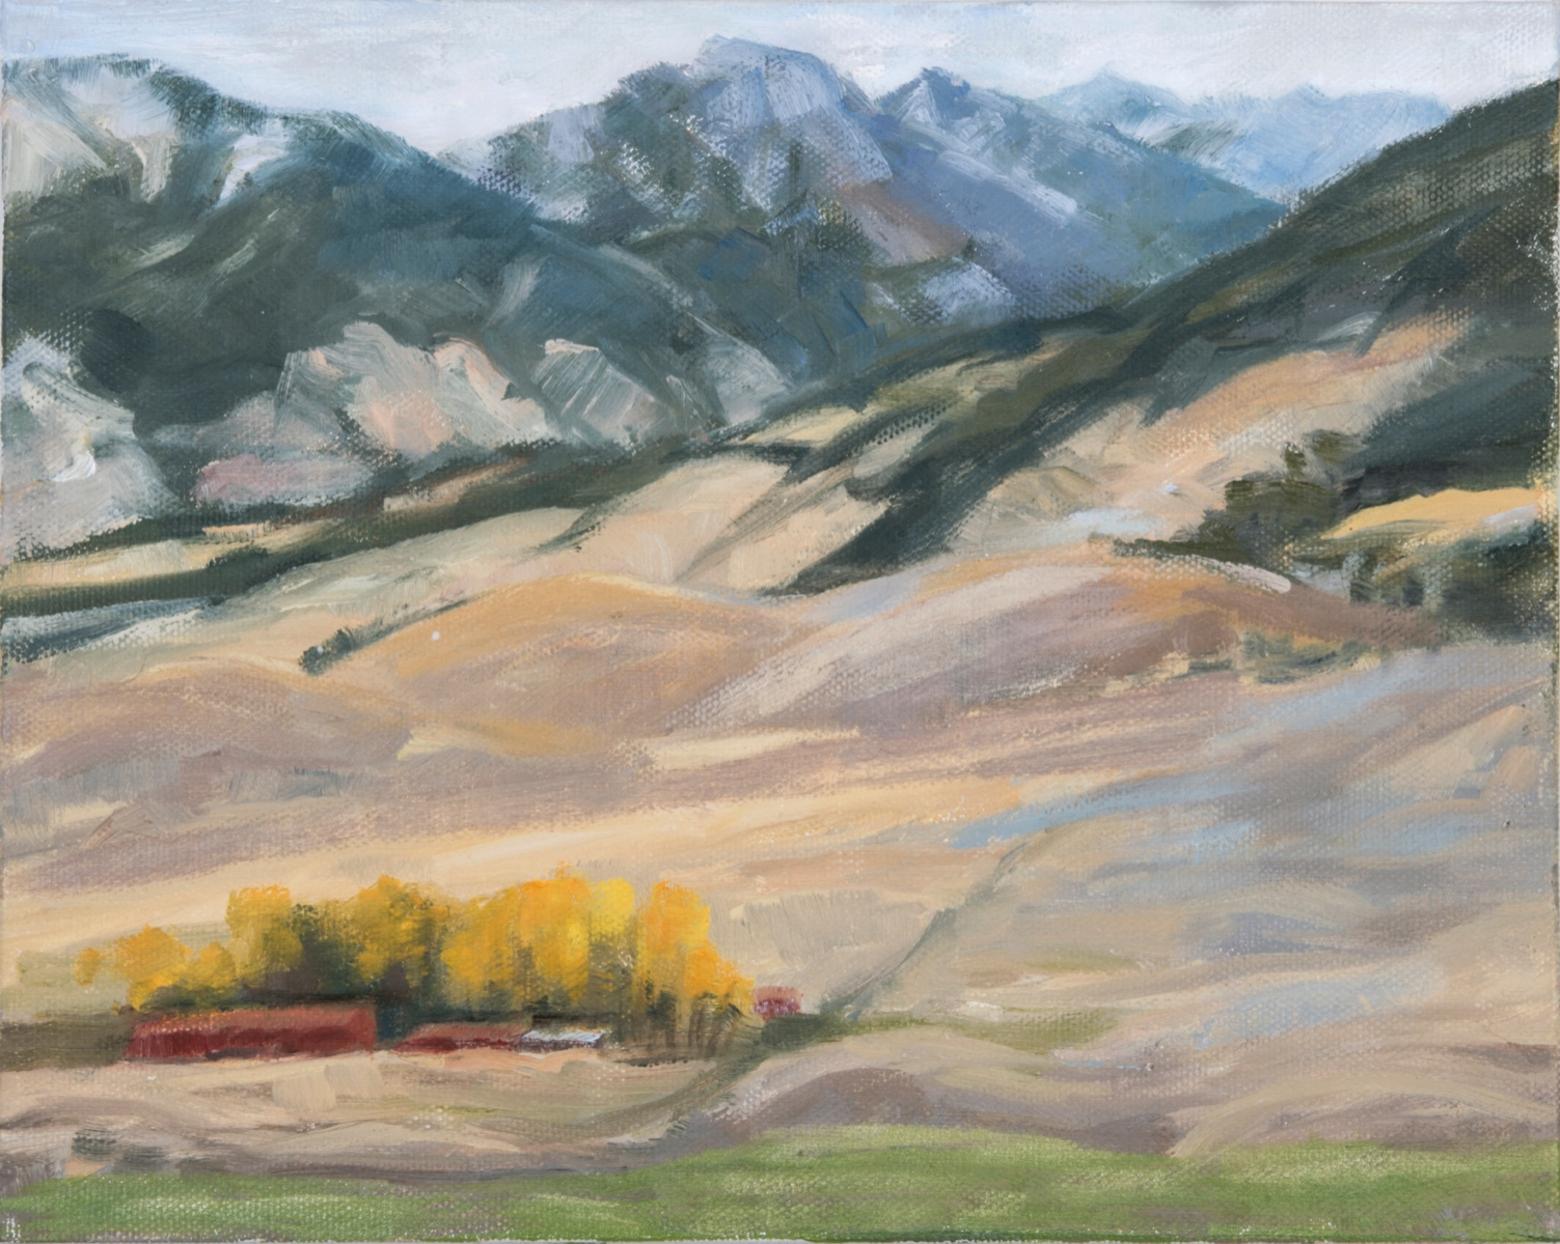 "Red Barns," a scene looking east in Montana's Paradise Valley between the Absaroka and Gallatin mountains and along the Yellowstone River.